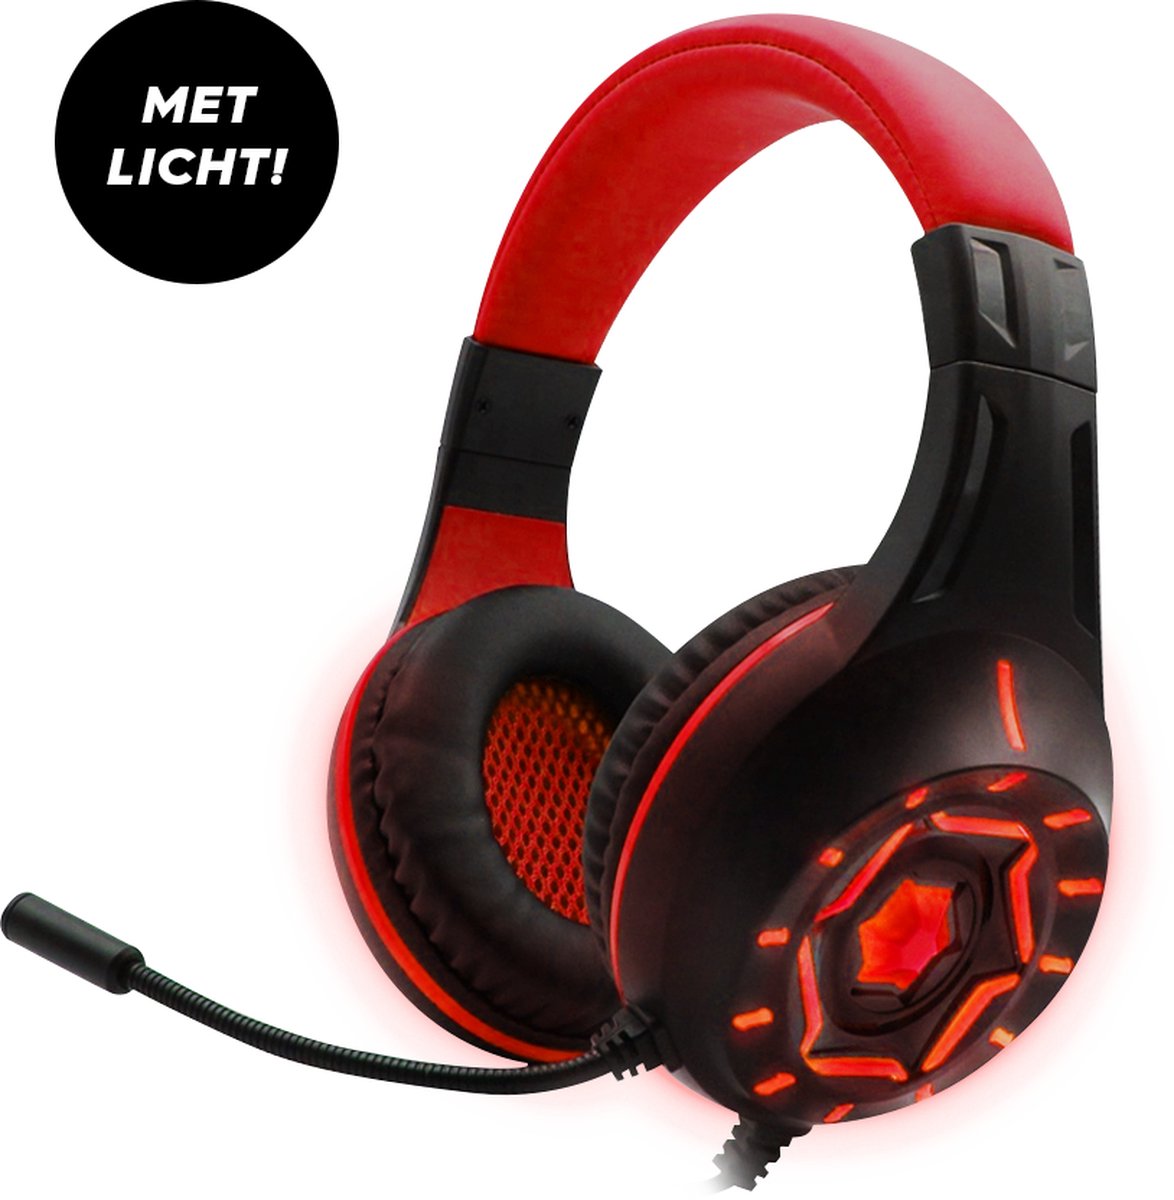 RAIDER HS2 PRO GAMING HEADSET - Over-ear Stereo RGB headset met Microfoon - 40 mm audio drivers - Rood/Zwart